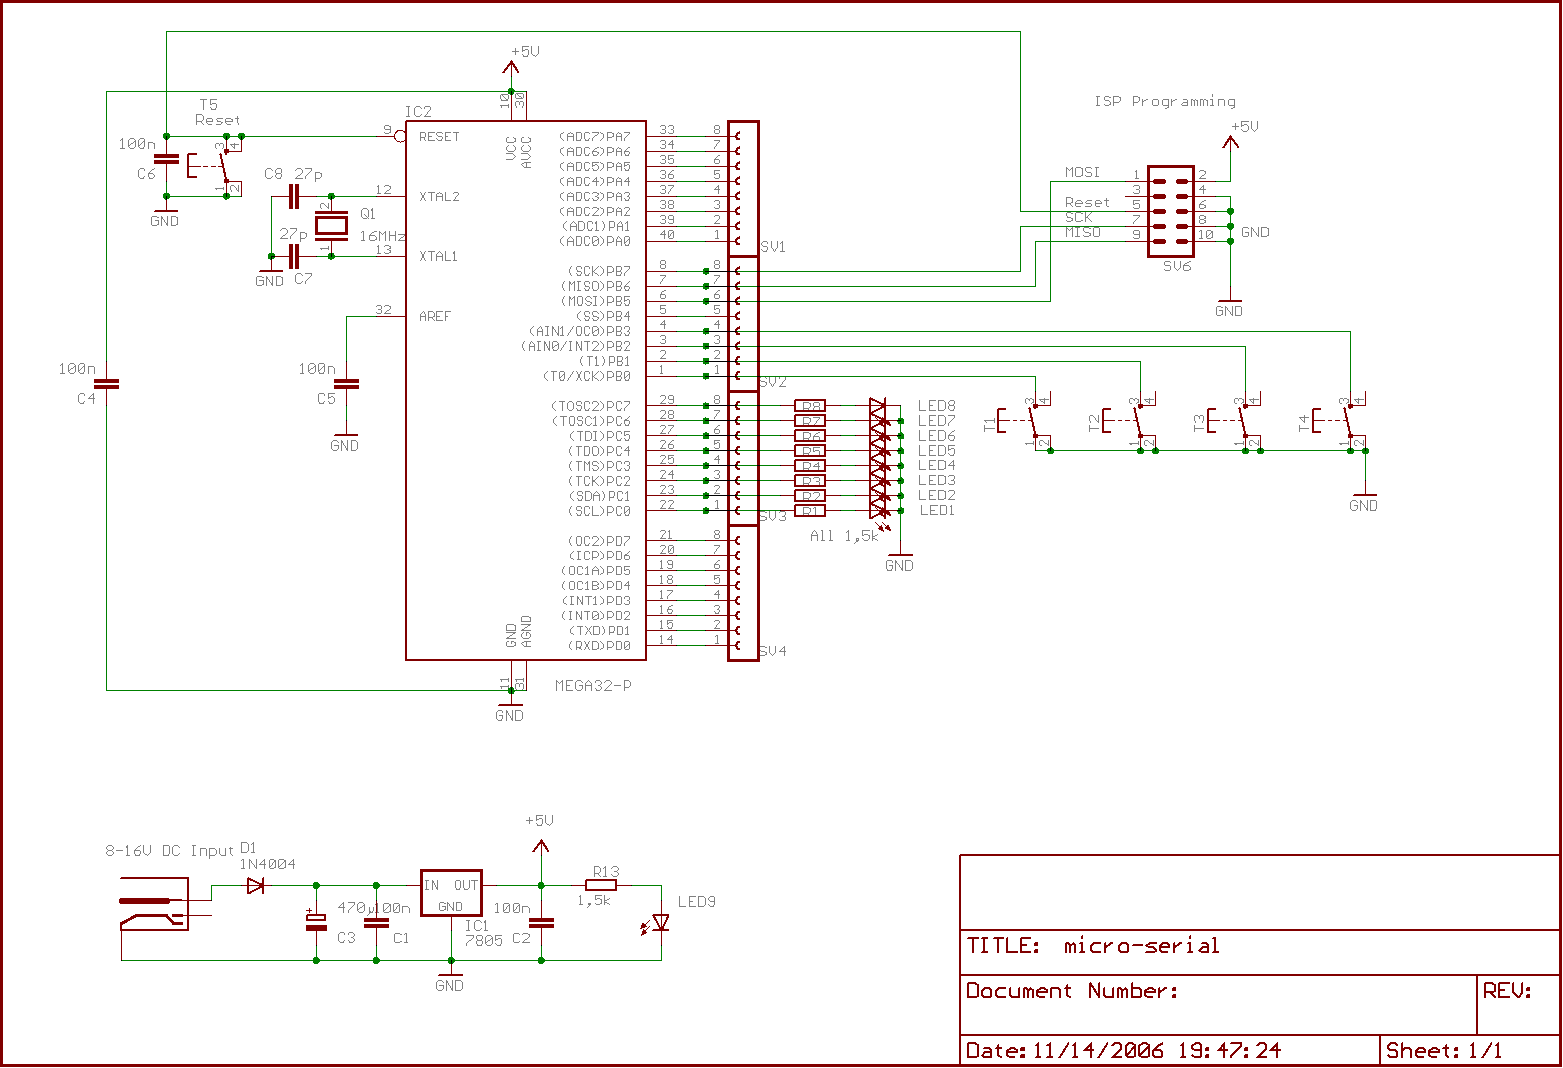 Laborboard-2006-schematic.png